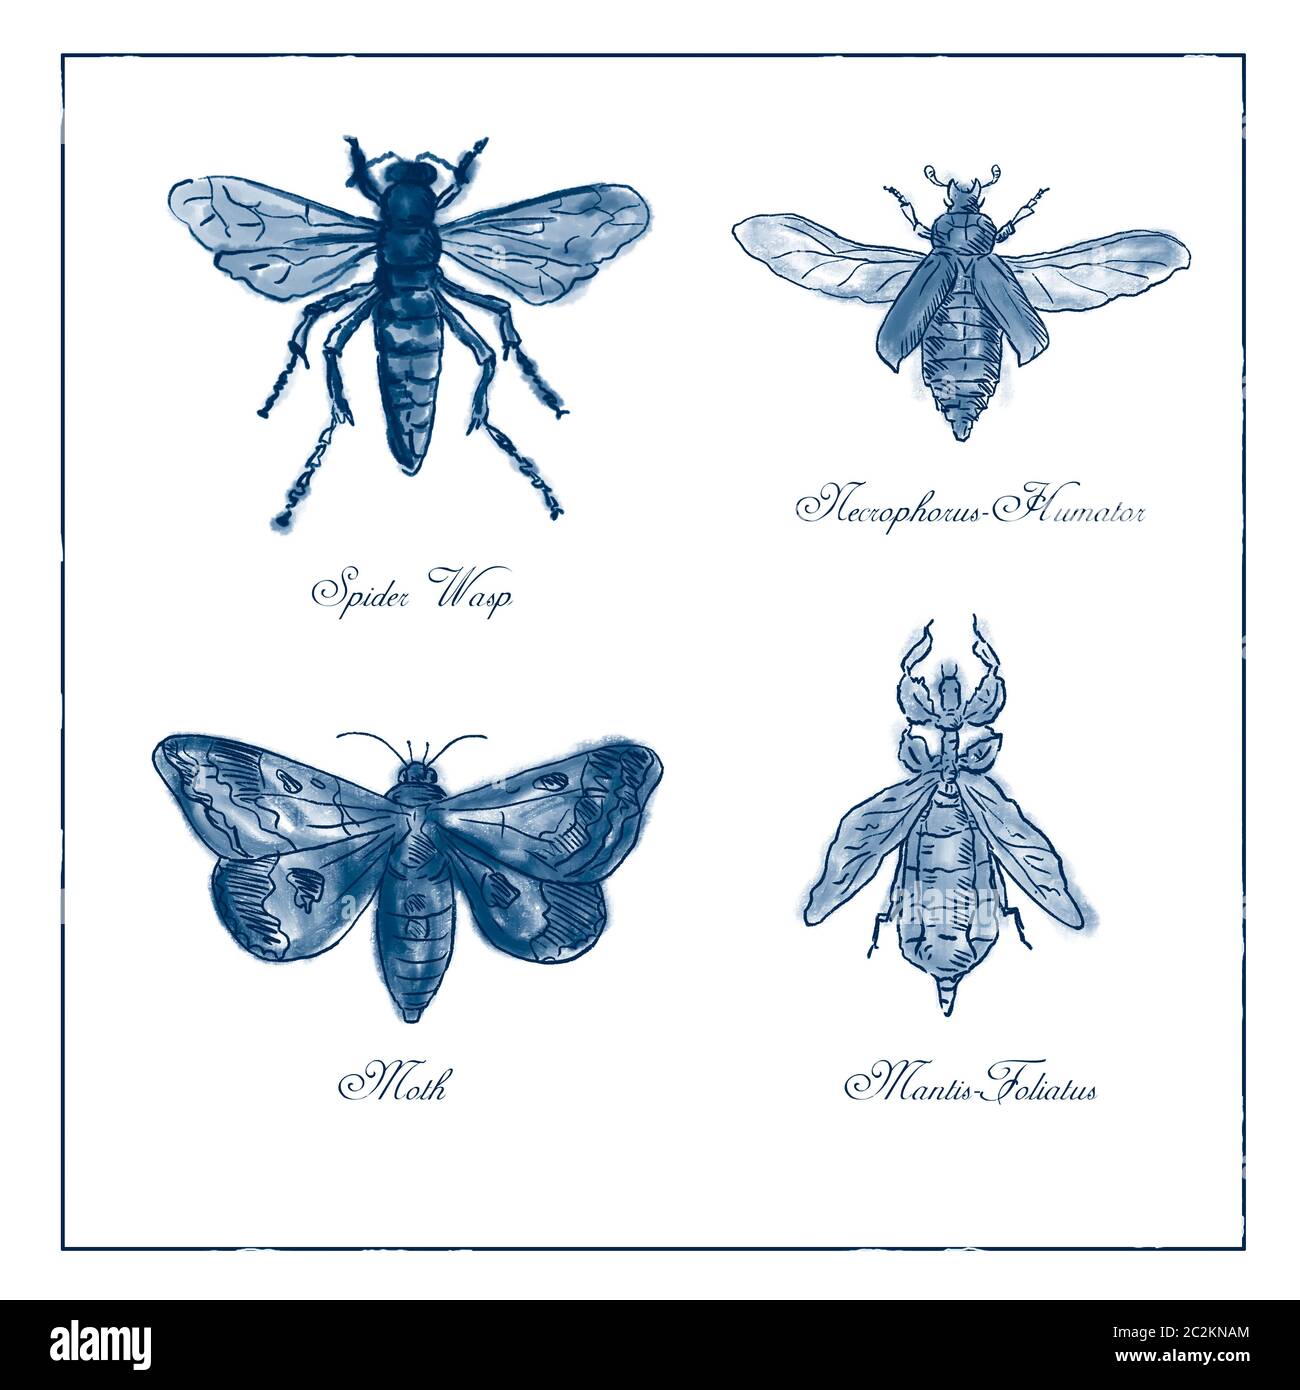 Vintage drawing illustration of a collection of insects like the Spider Wasp, Moth, Necrophorus Humator beetle, Mantis Foliatus in blue duotone on iso Stock Photo